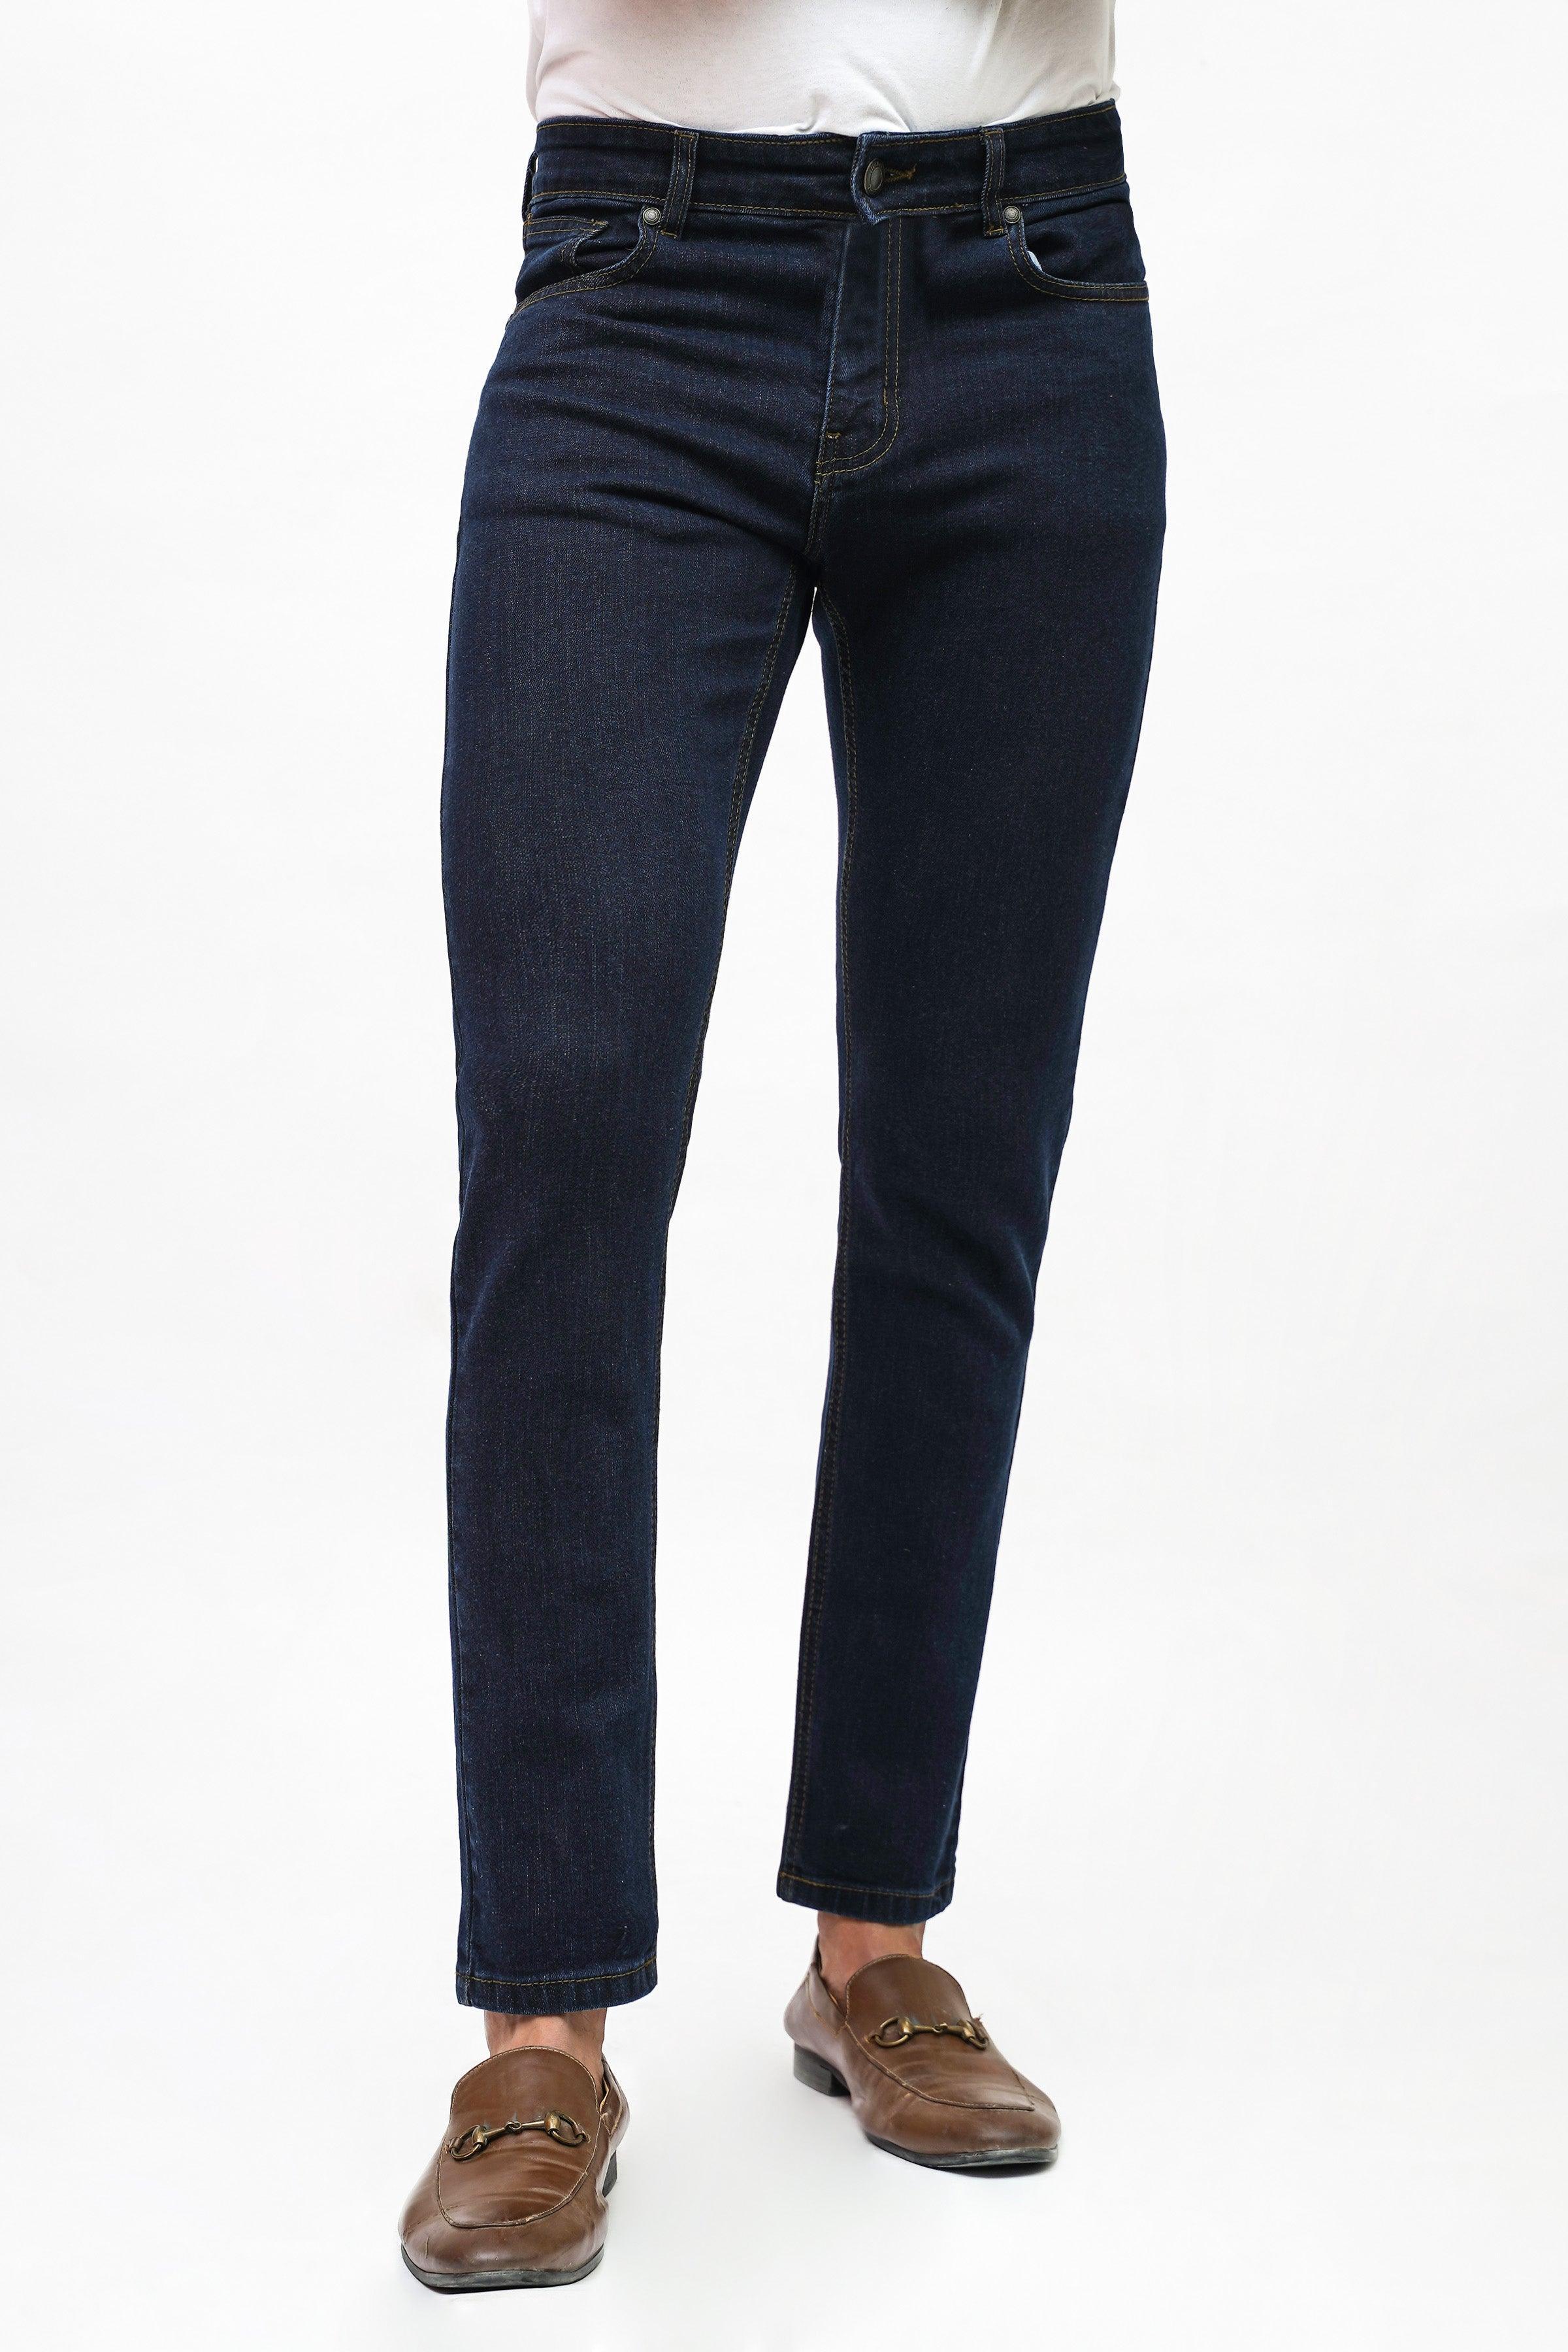 SLIM FIT DARK BLUE JEANS at Charcoal Clothing